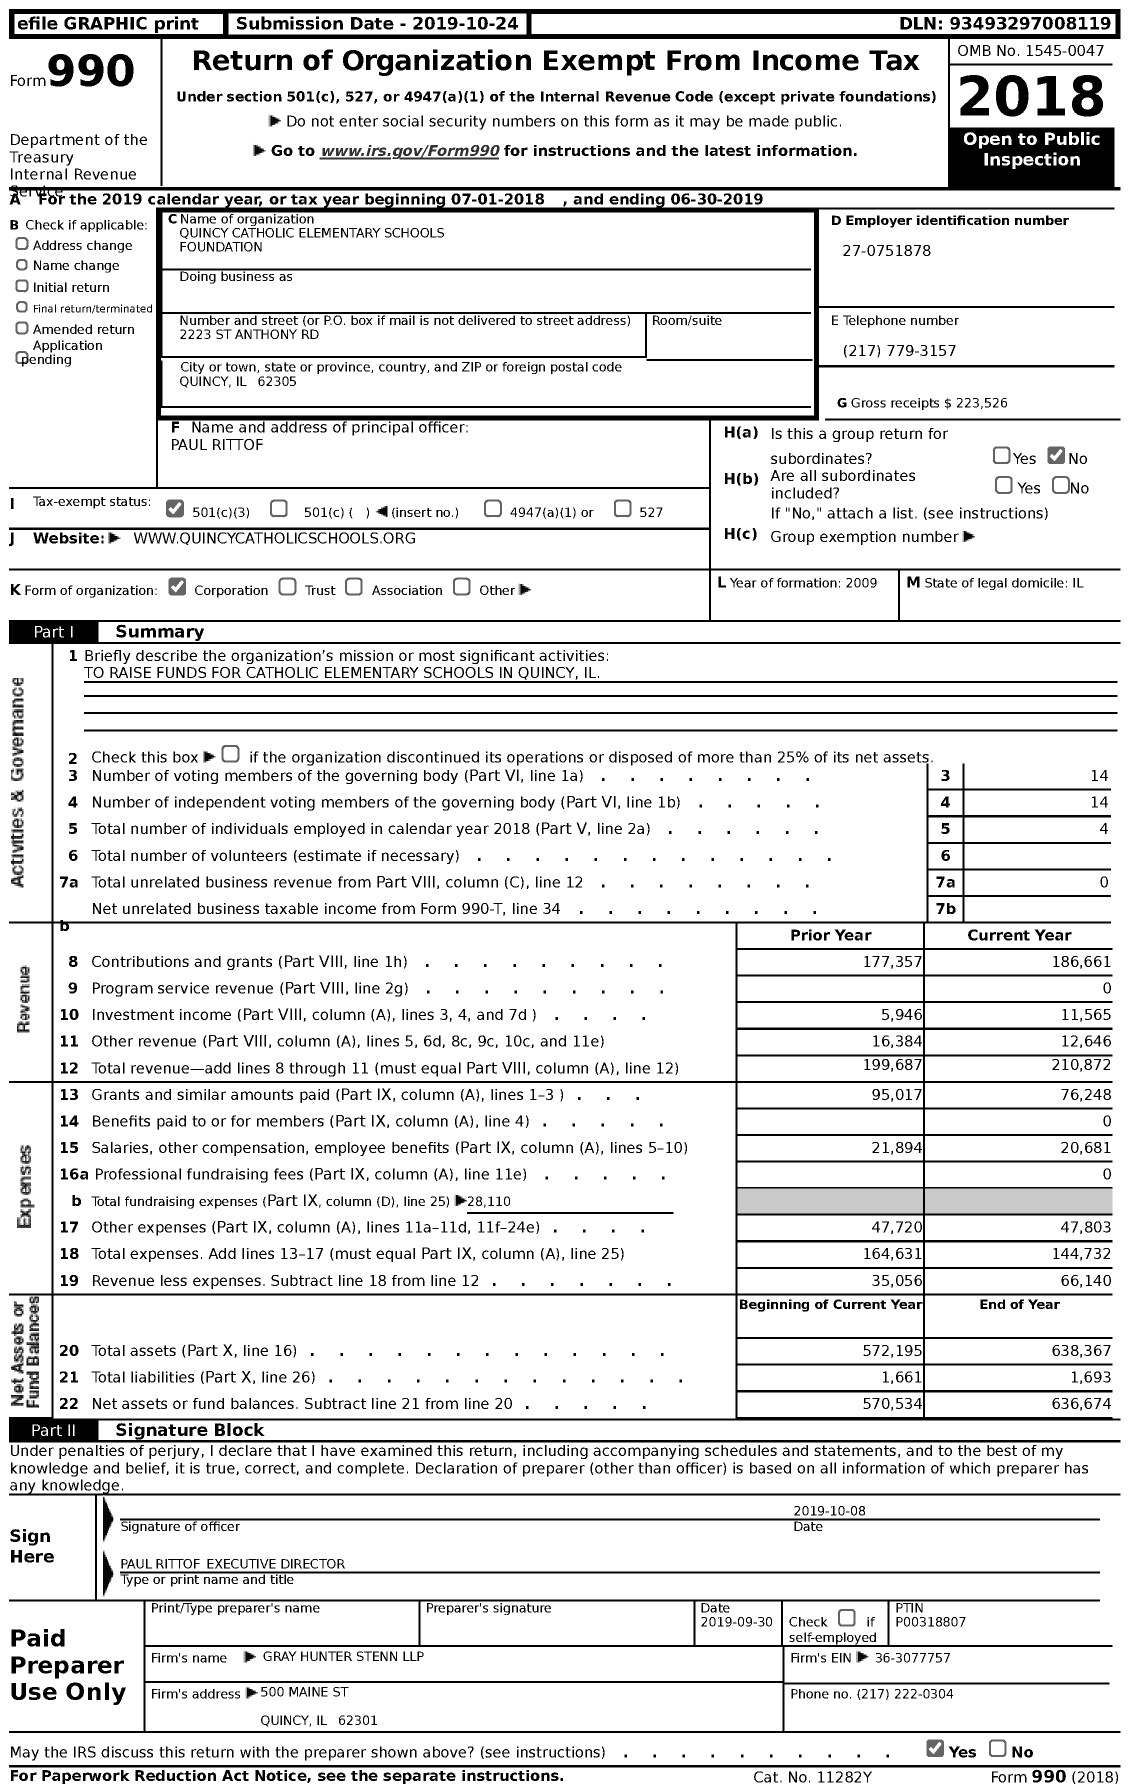 Image of first page of 2018 Form 990 for Quincy Catholic Elementary Schools Foundation